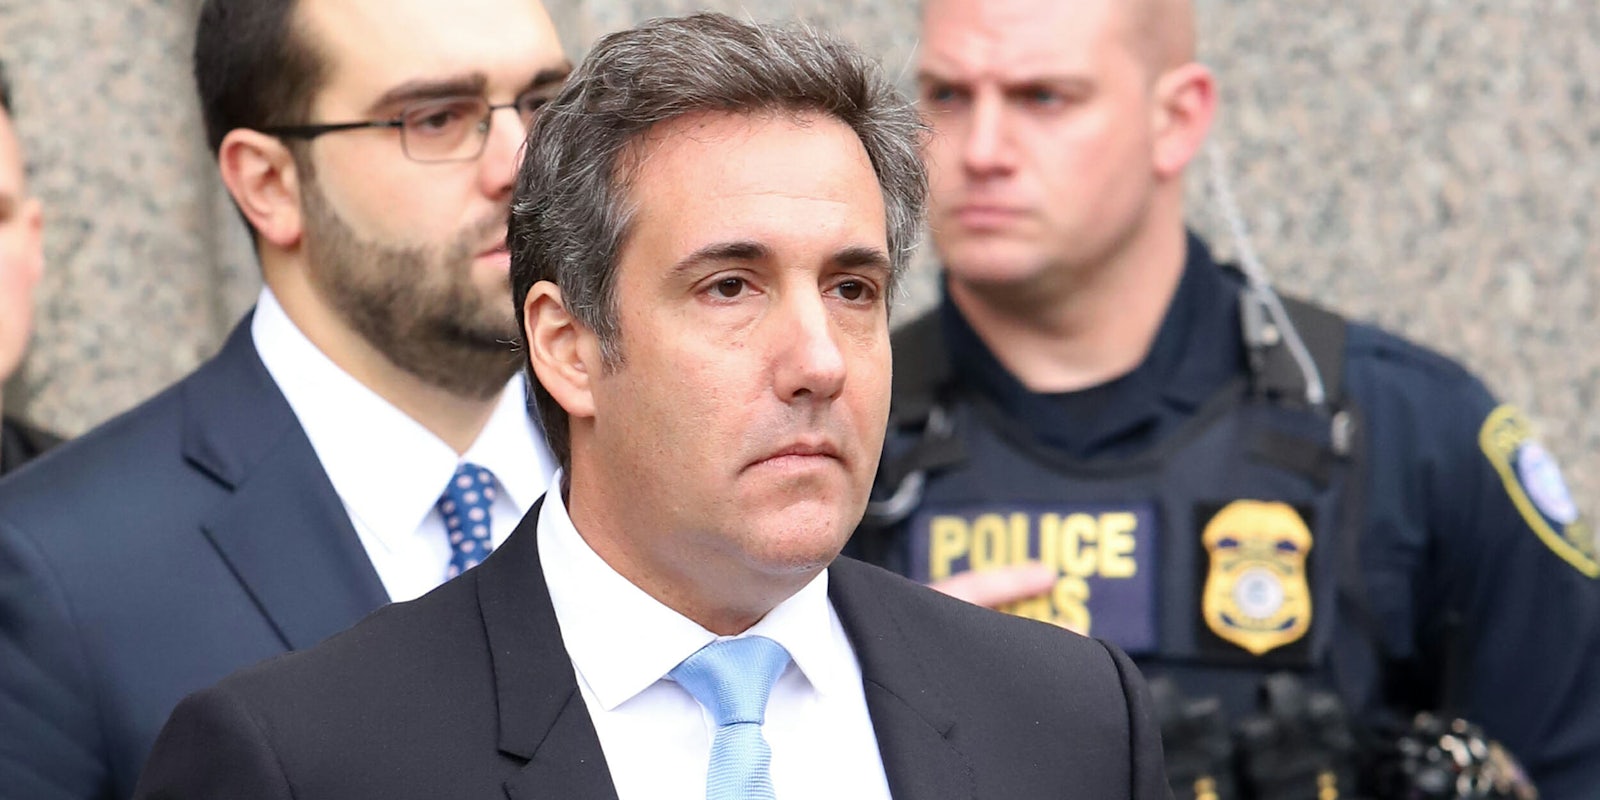 michael cohen and police